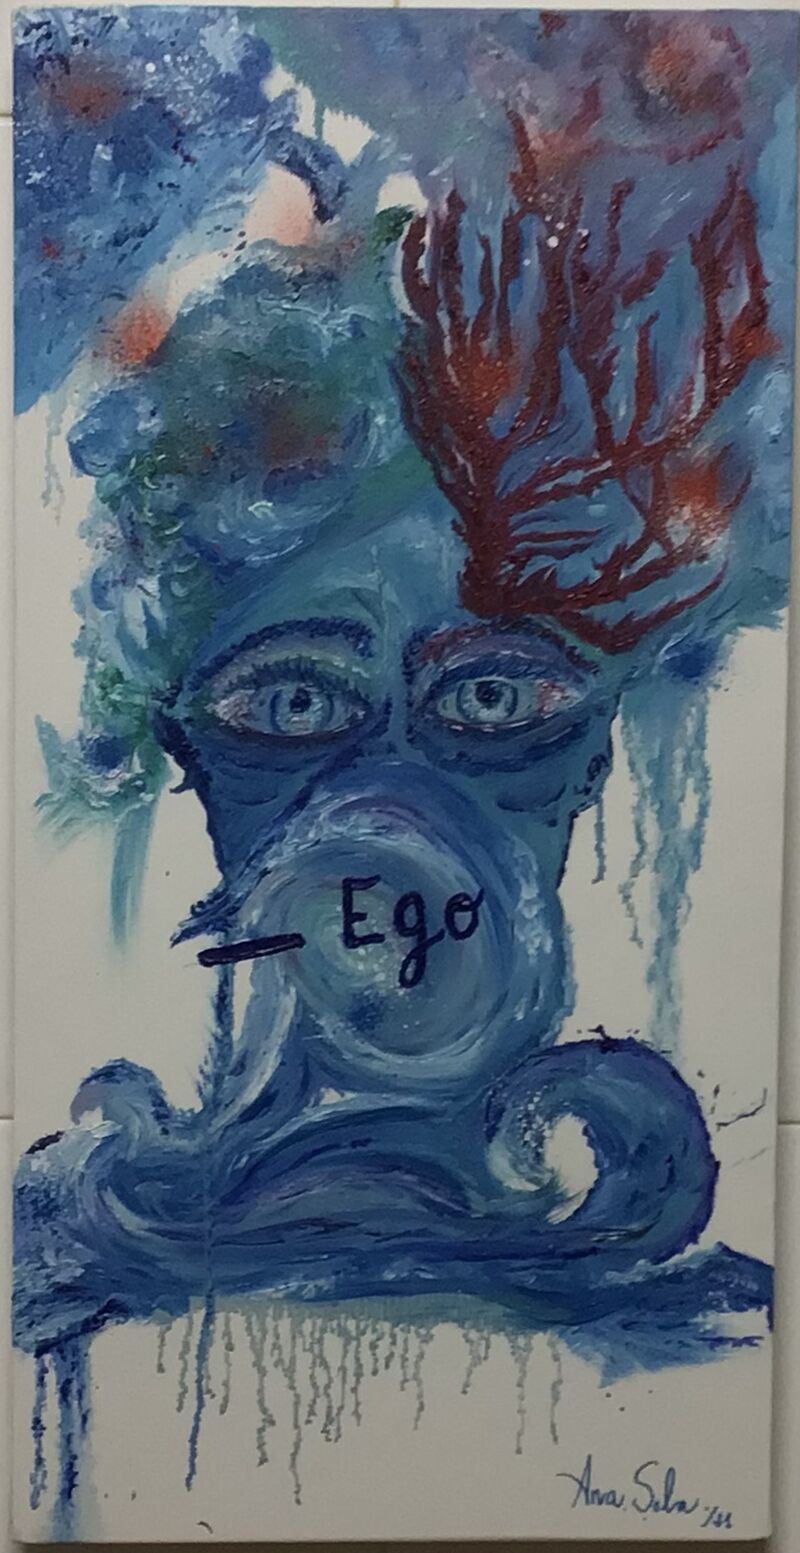 - Ego - a Paint by Anasolber